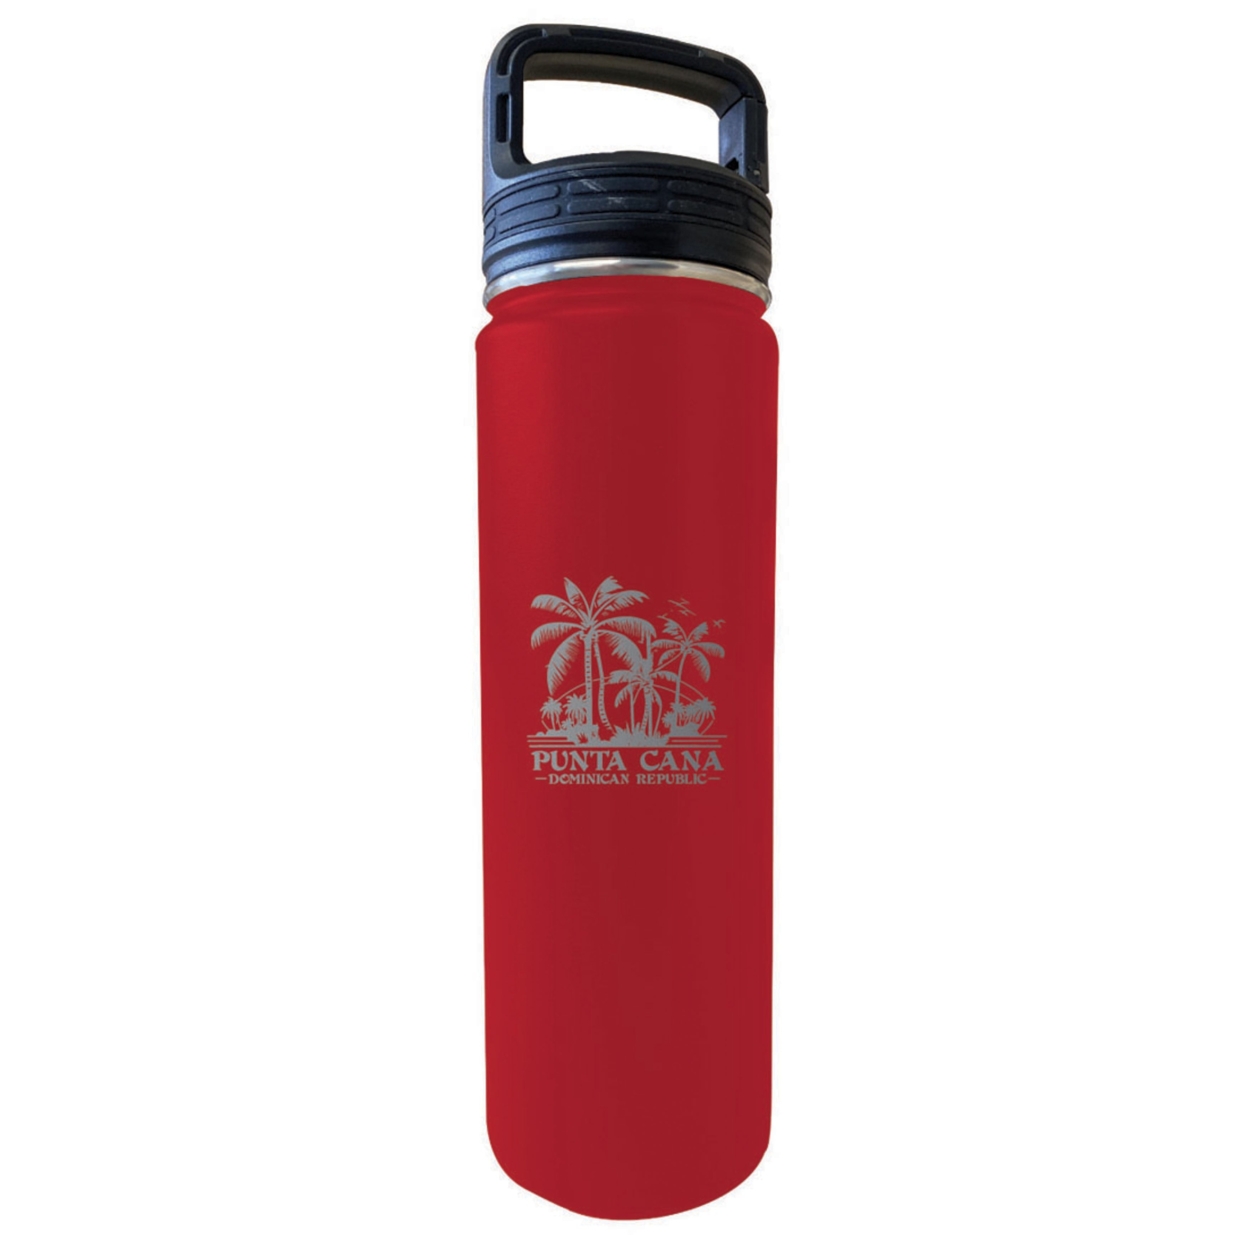 Punta Cana Dominican Republic Souvenir 32 Oz Insulated Stainless Steel Tumbler - Red, Parrot